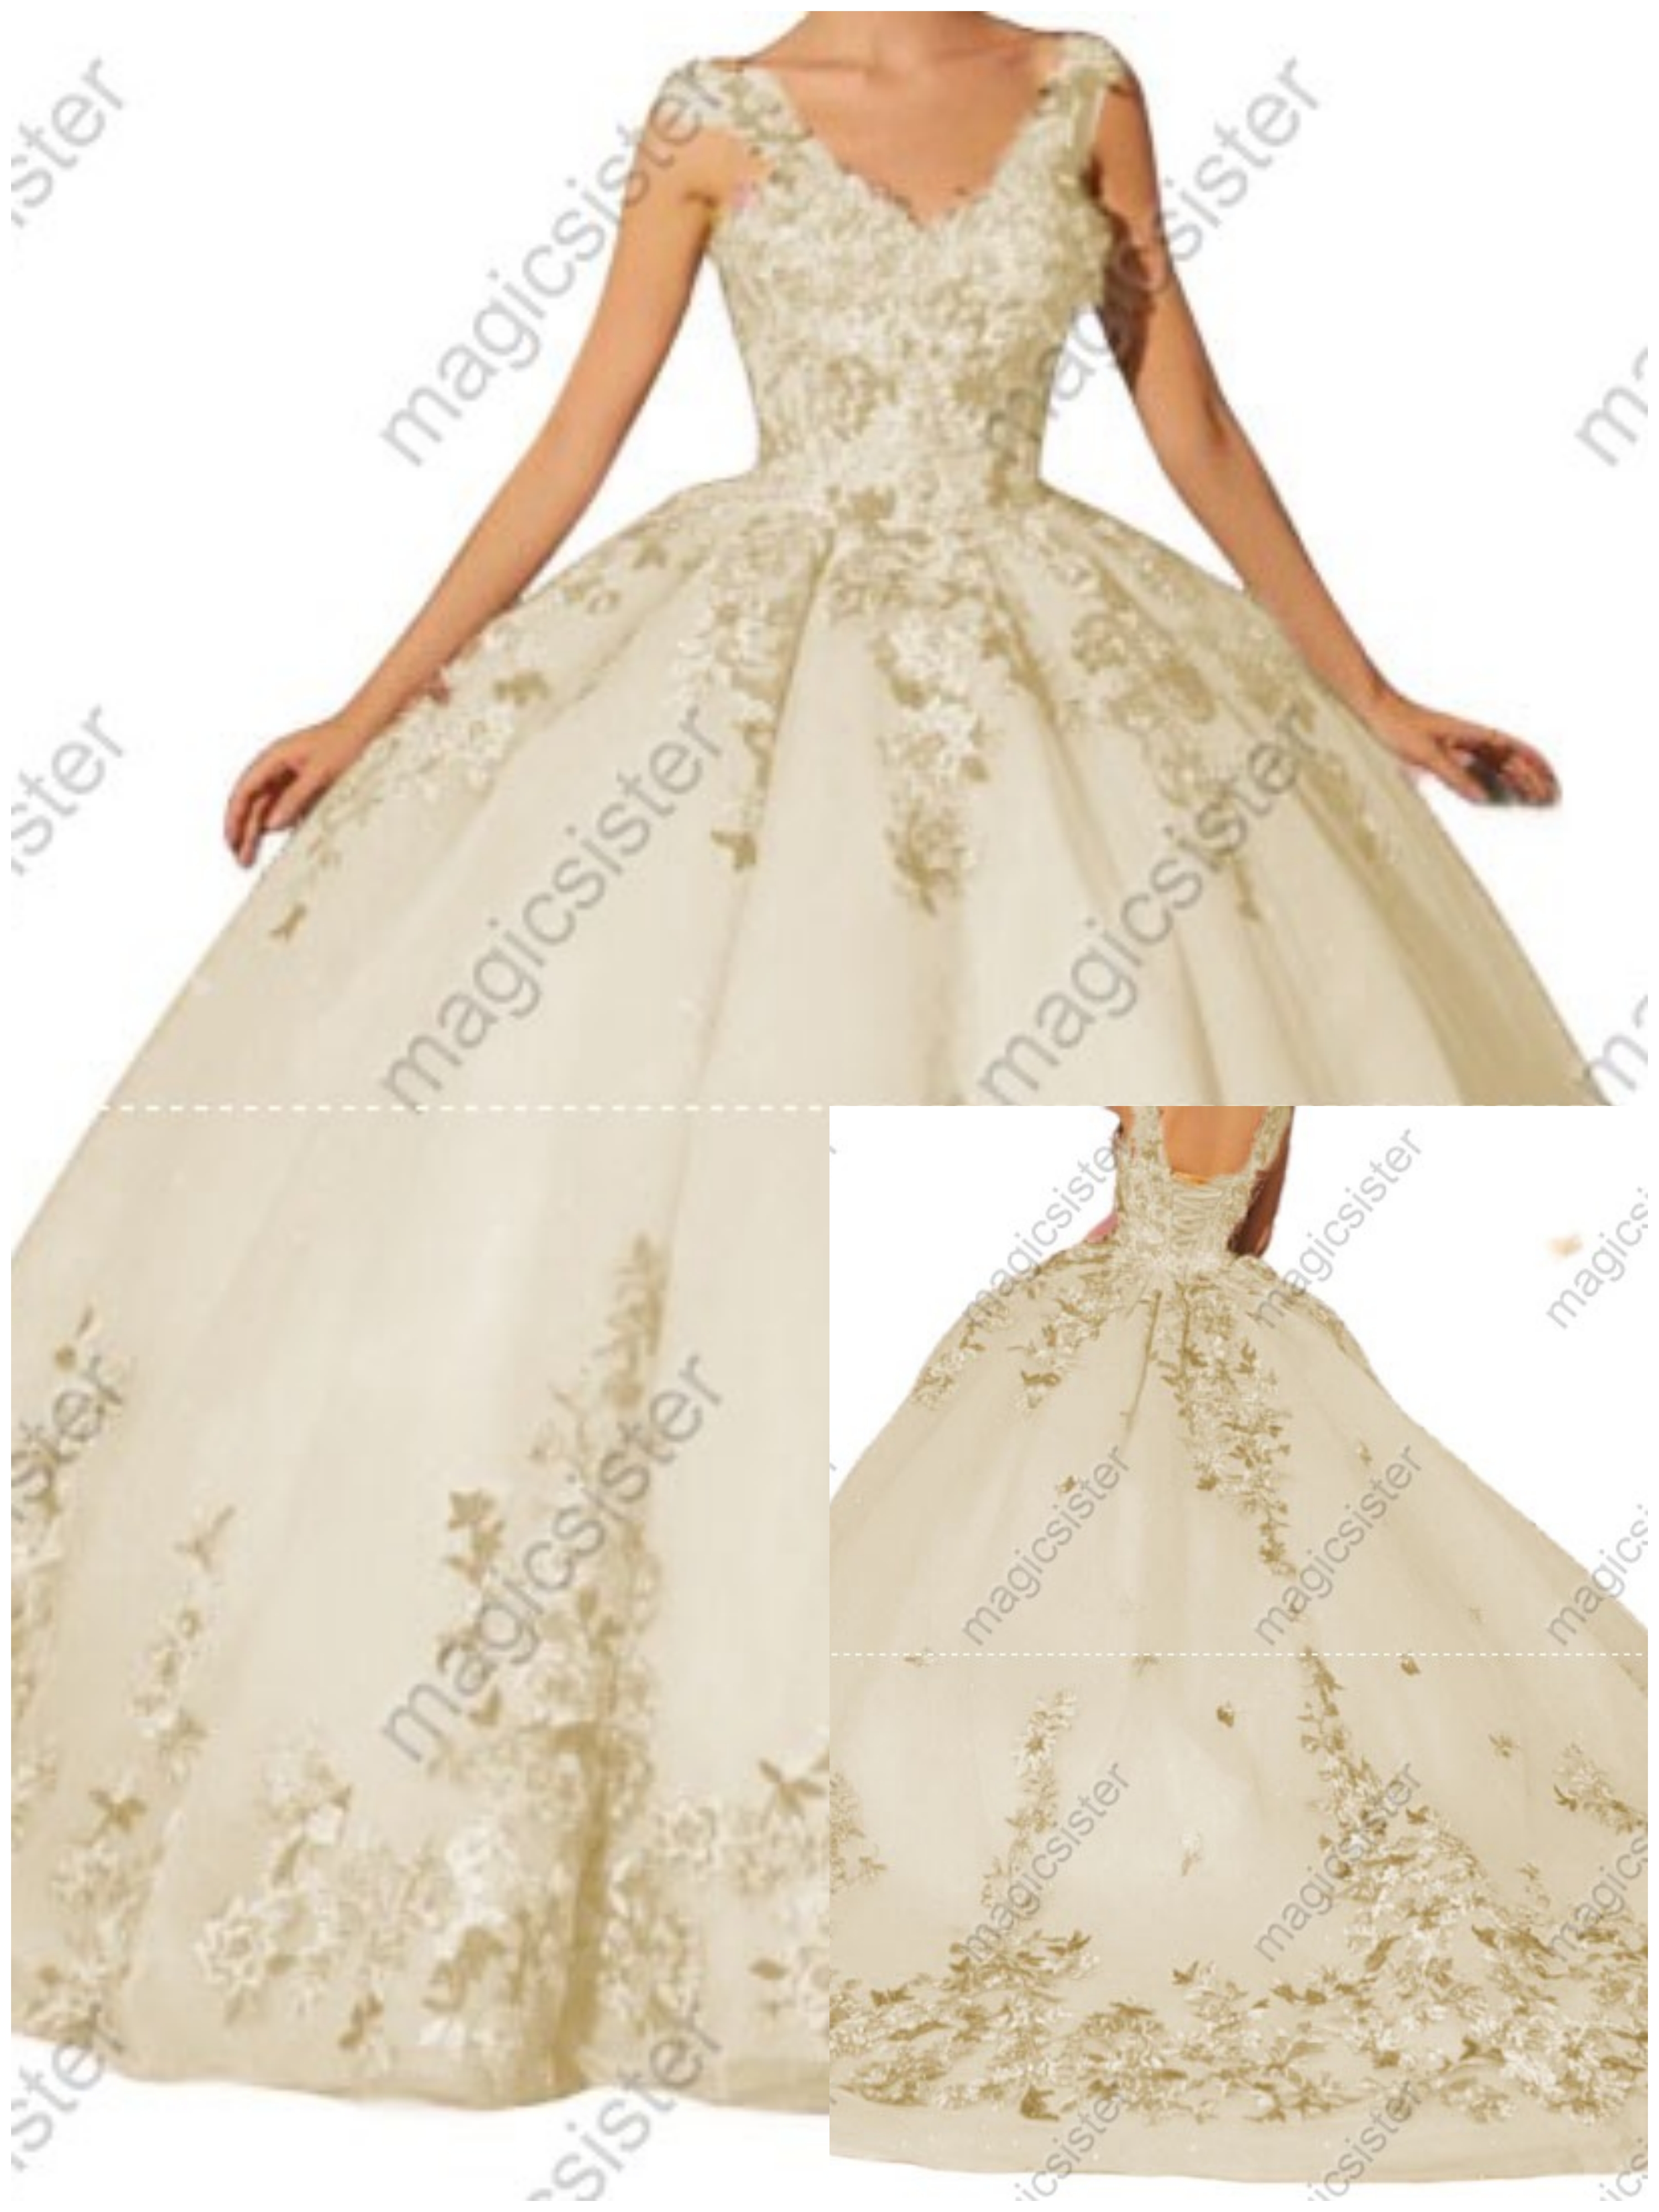 Instock Factory Multicolor Embroidered Floral Quinceanera Dress